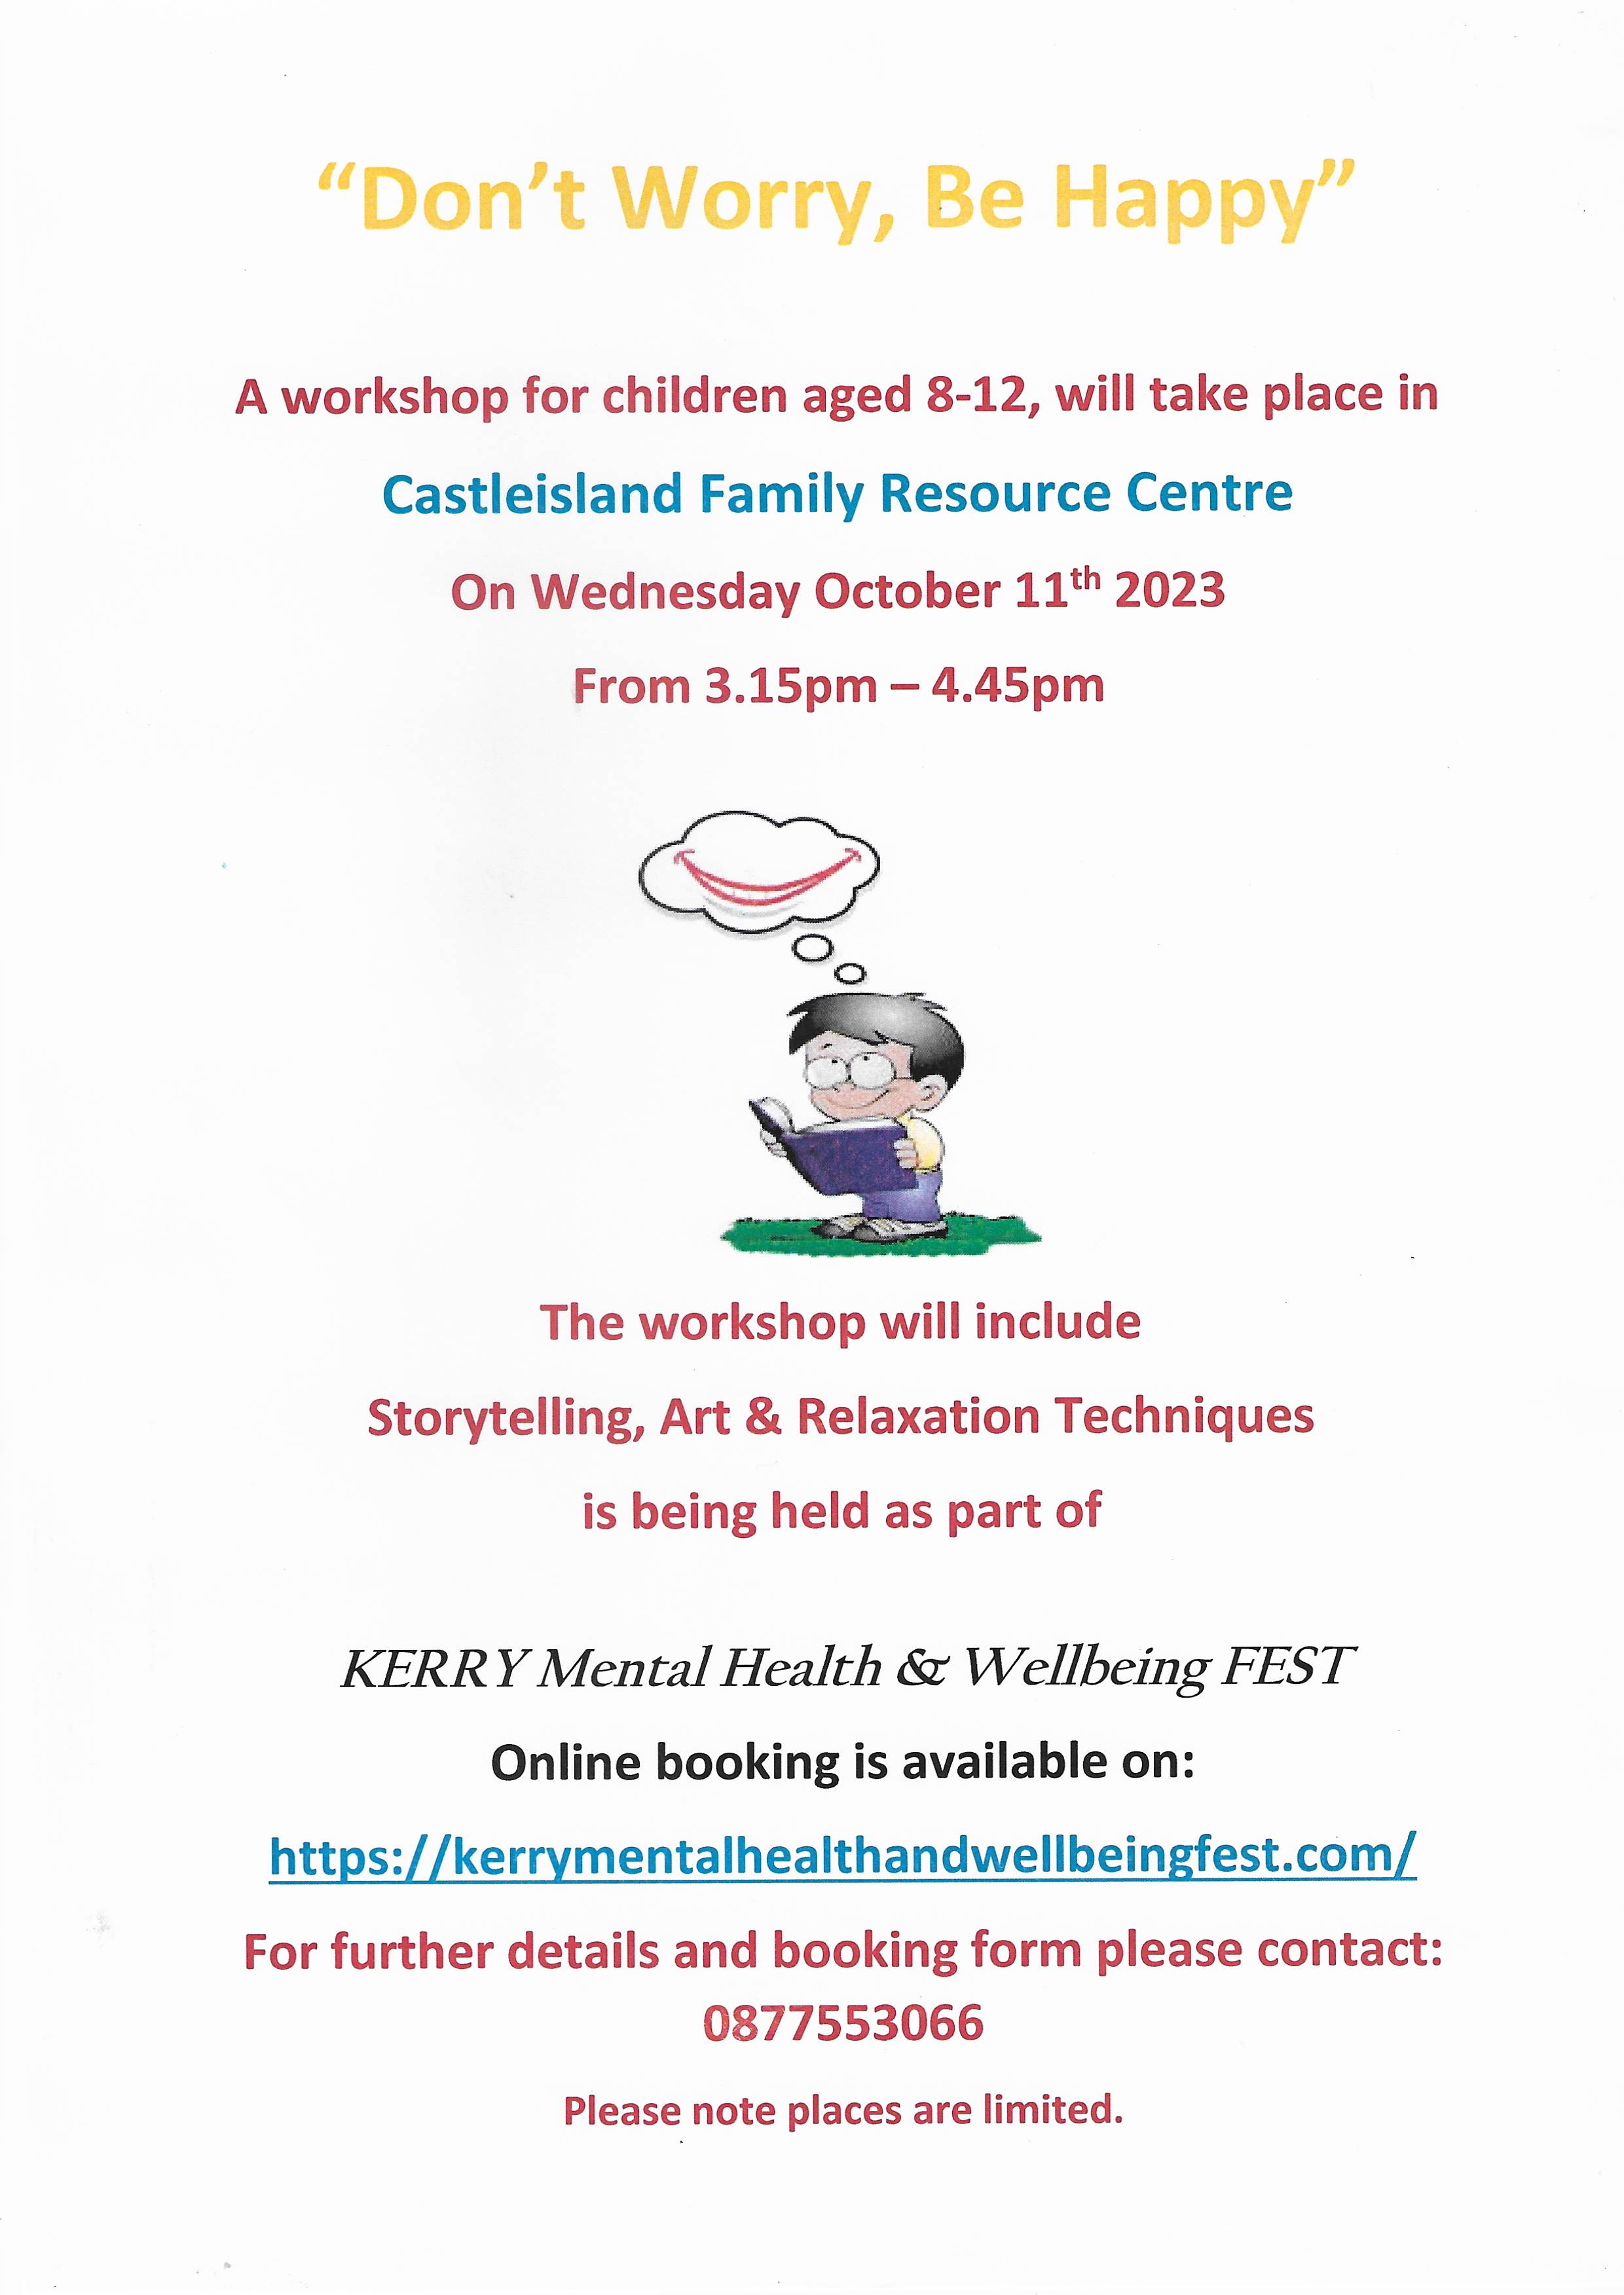 Don't Worry, Be Happy event at Kerry Mental Health & Wellbeing Fest 2023